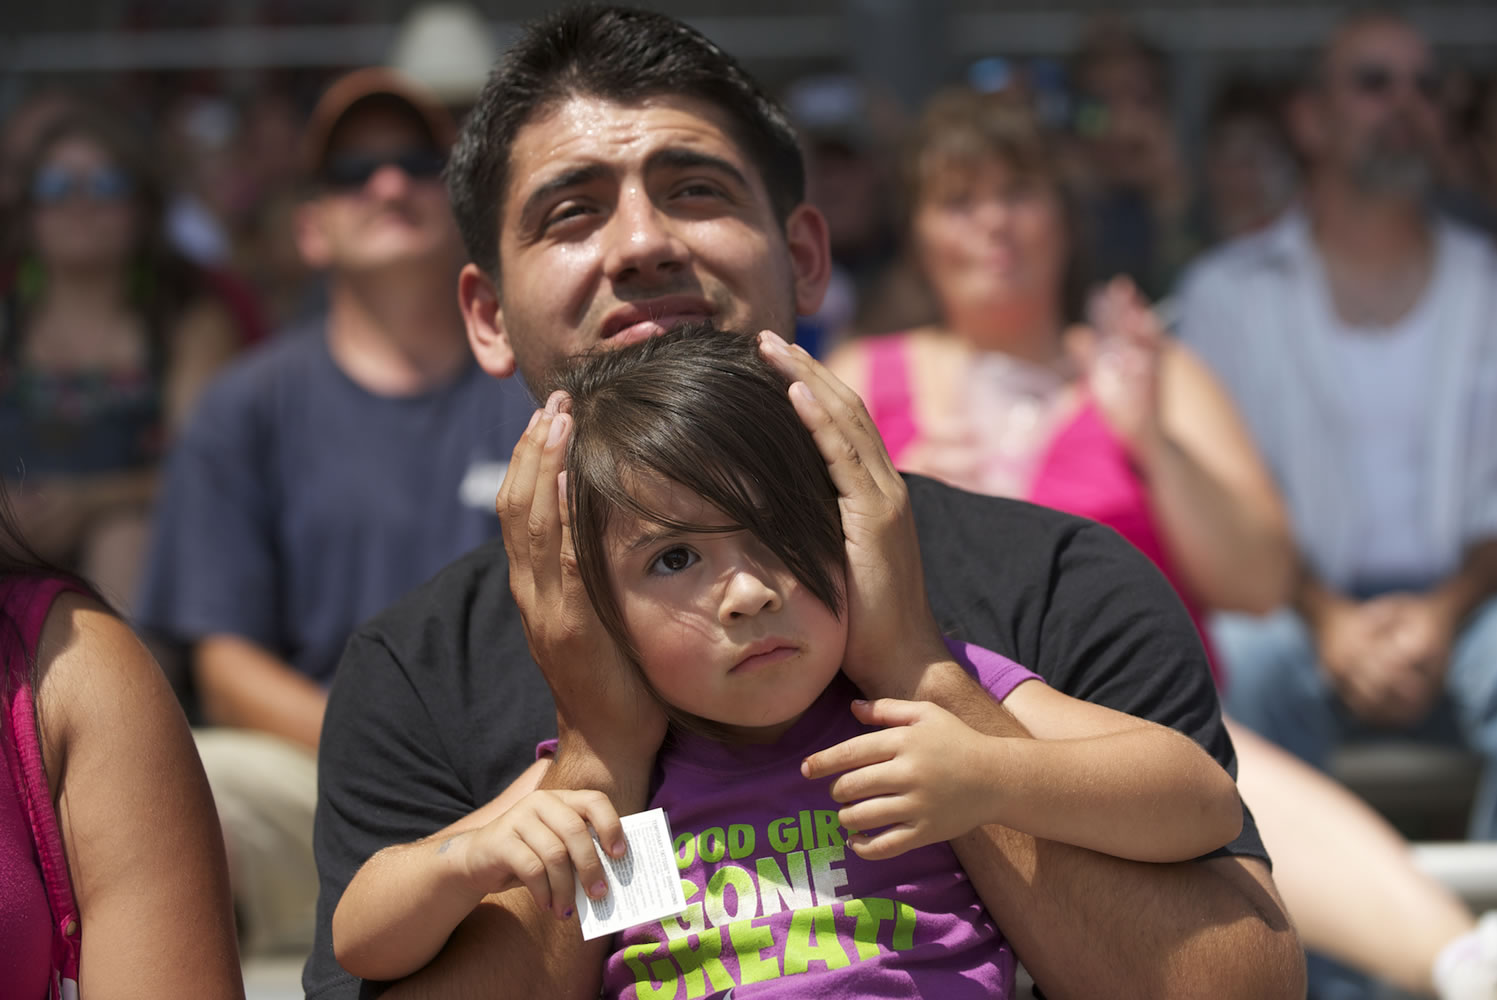 Adam and Sarah Cardona of Salem, Ore., watch the afternoon Monster Truck Show at the fair.